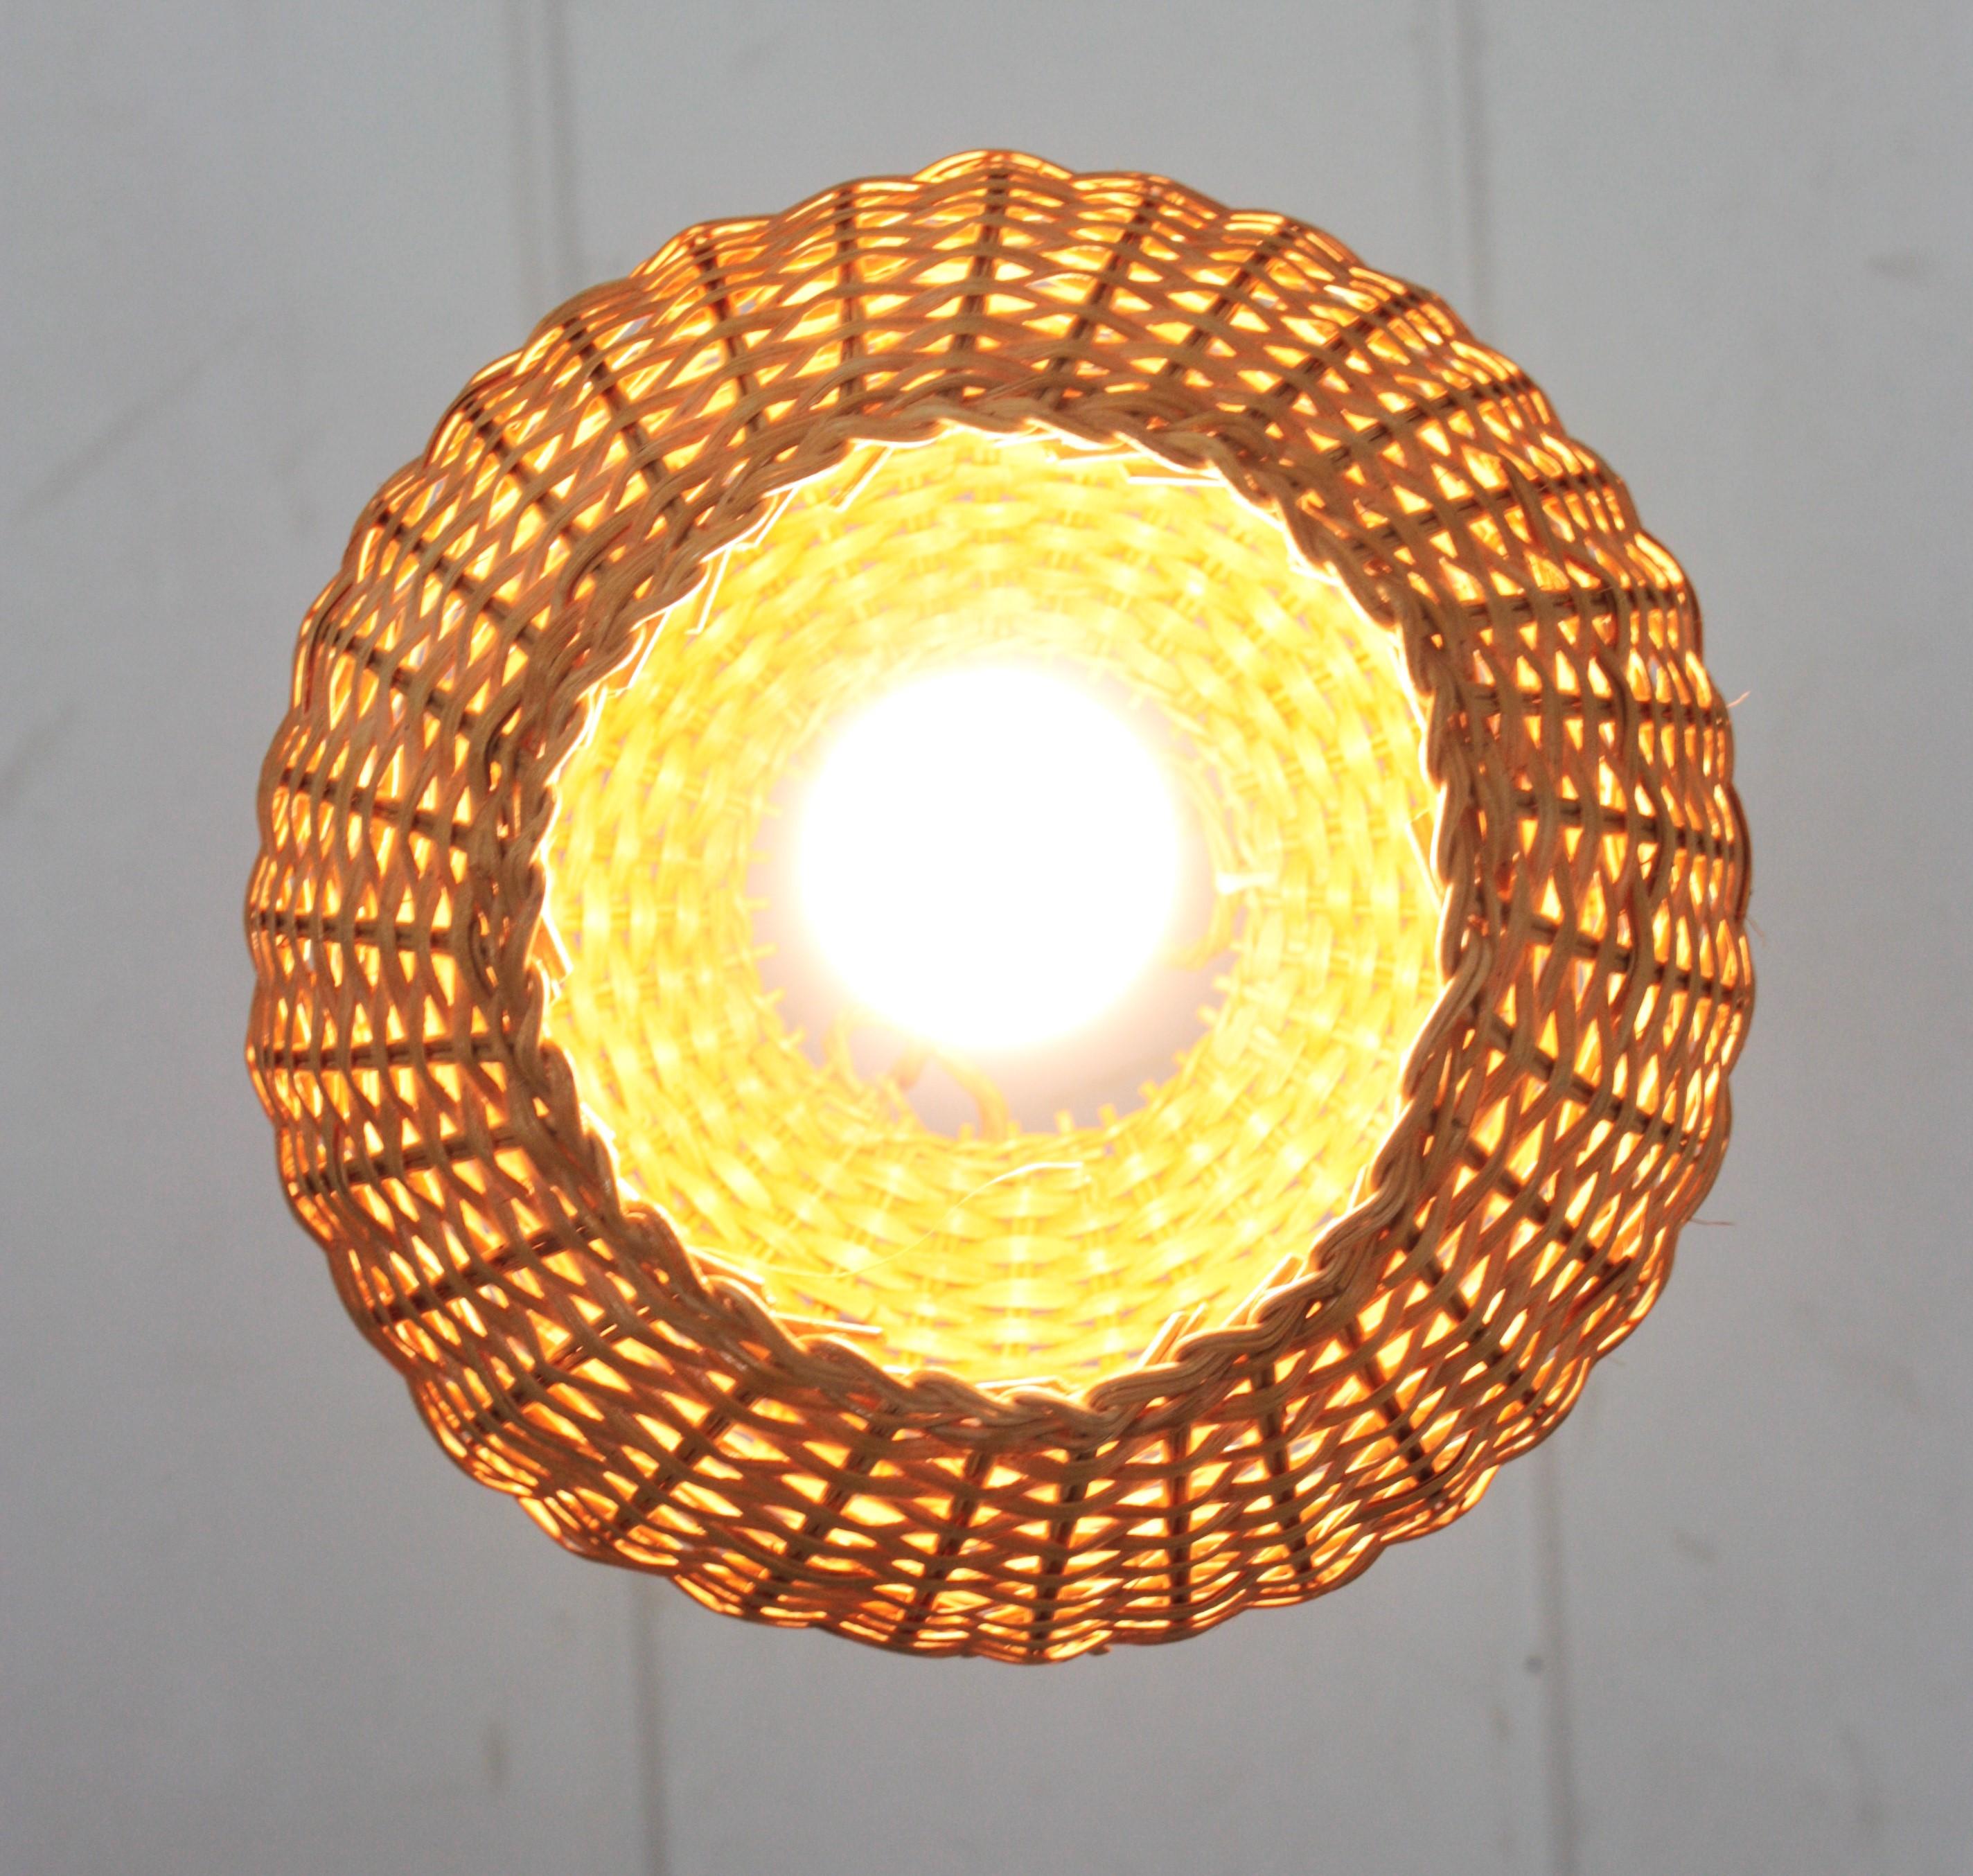 Pair of Handwoven Wicker Globe Pendant Lights or Lanterns For Sale 8